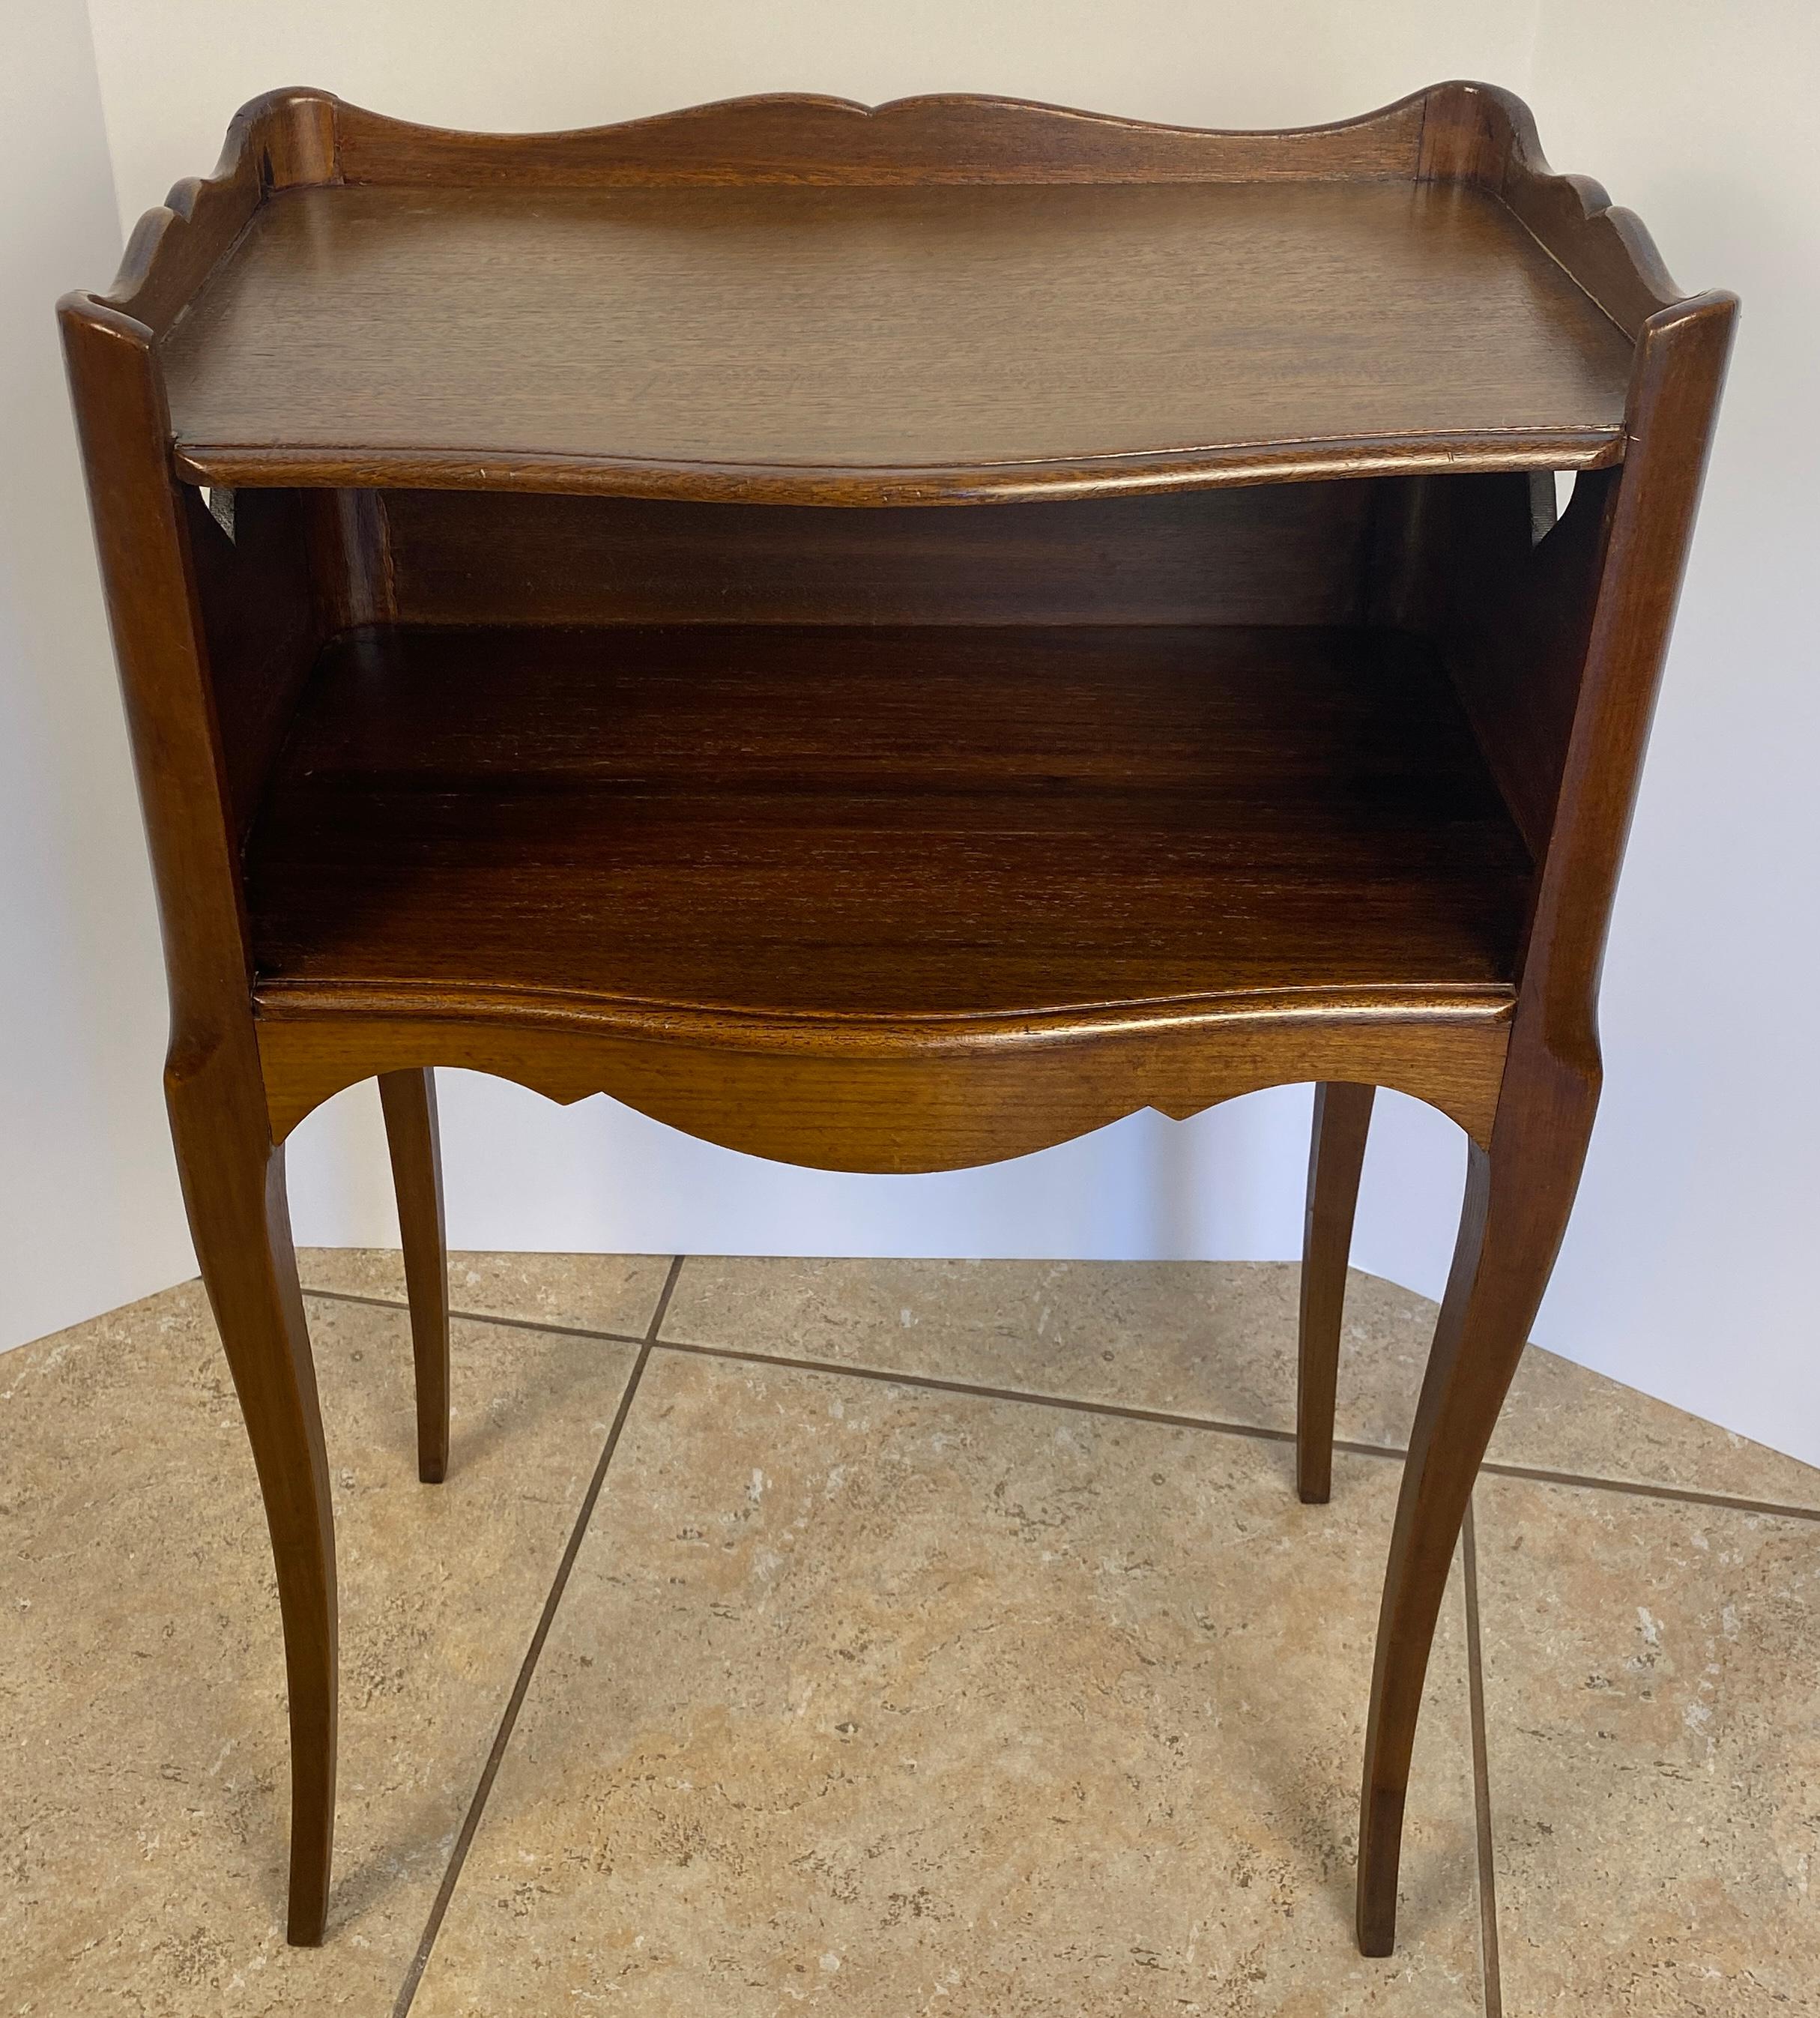 A Louis XV style country French side table or nightstand made of solid mahogany, with open niche and pierced cut-out heart shapes on the sides. Scalloped apron and gallery surrounding the top. One drawer. 

Very good quality table with curved